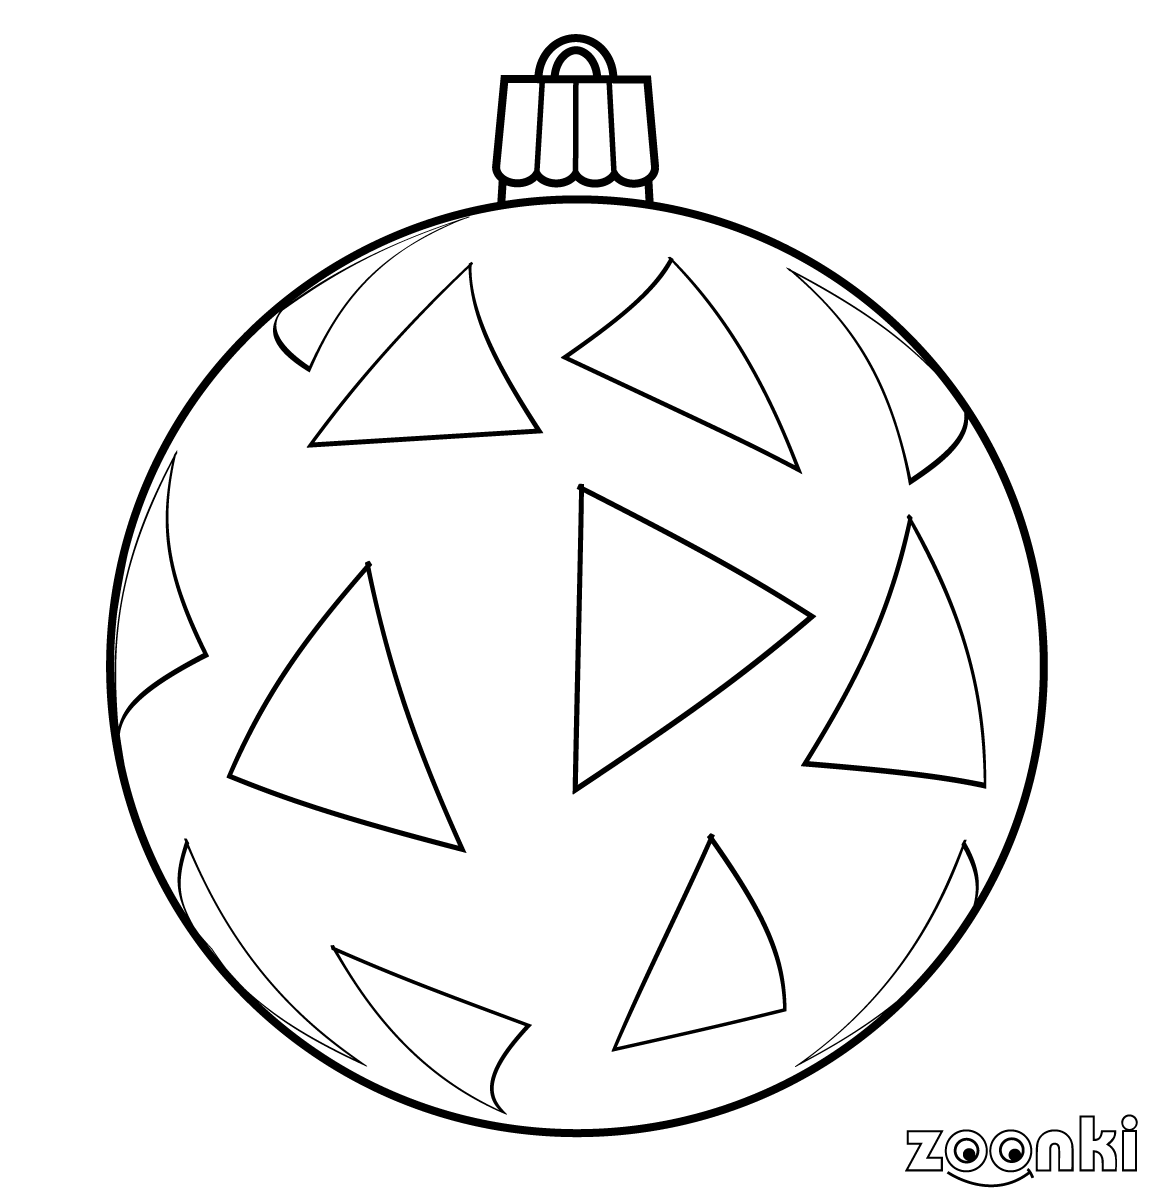 zoonki black & white Christmas bauble for coloring